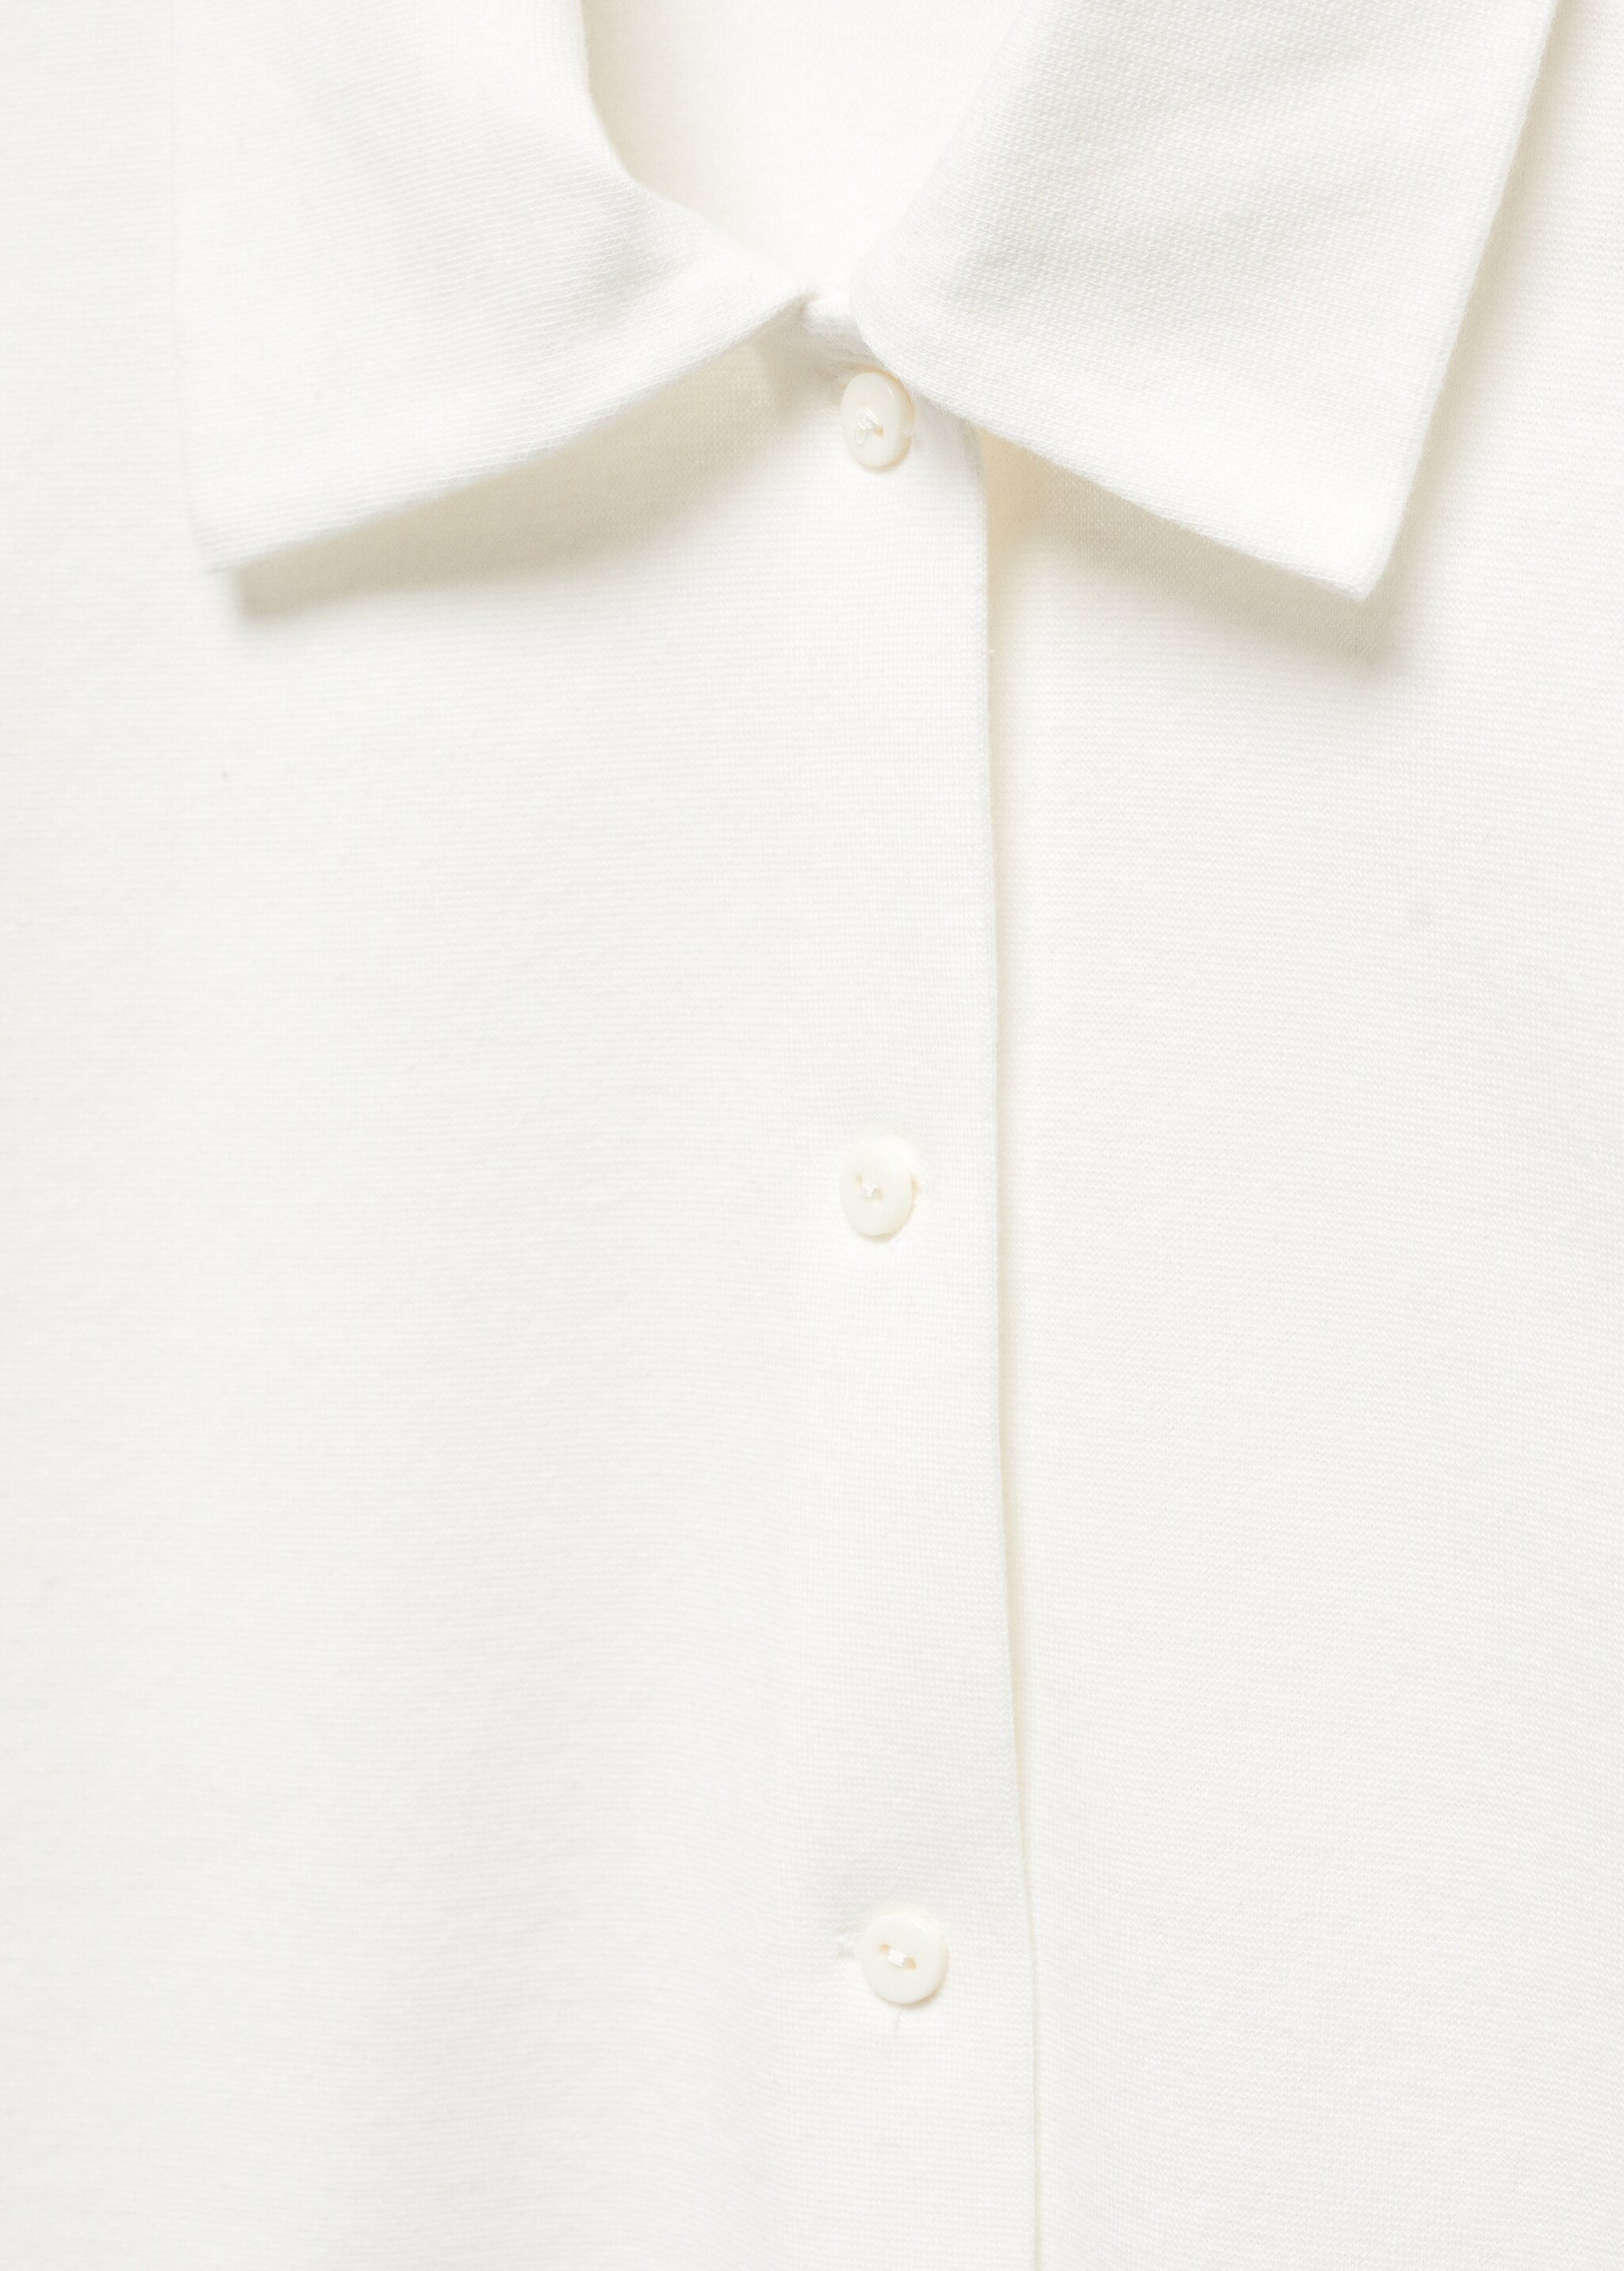 Cotton knit shirt - Details of the article 8